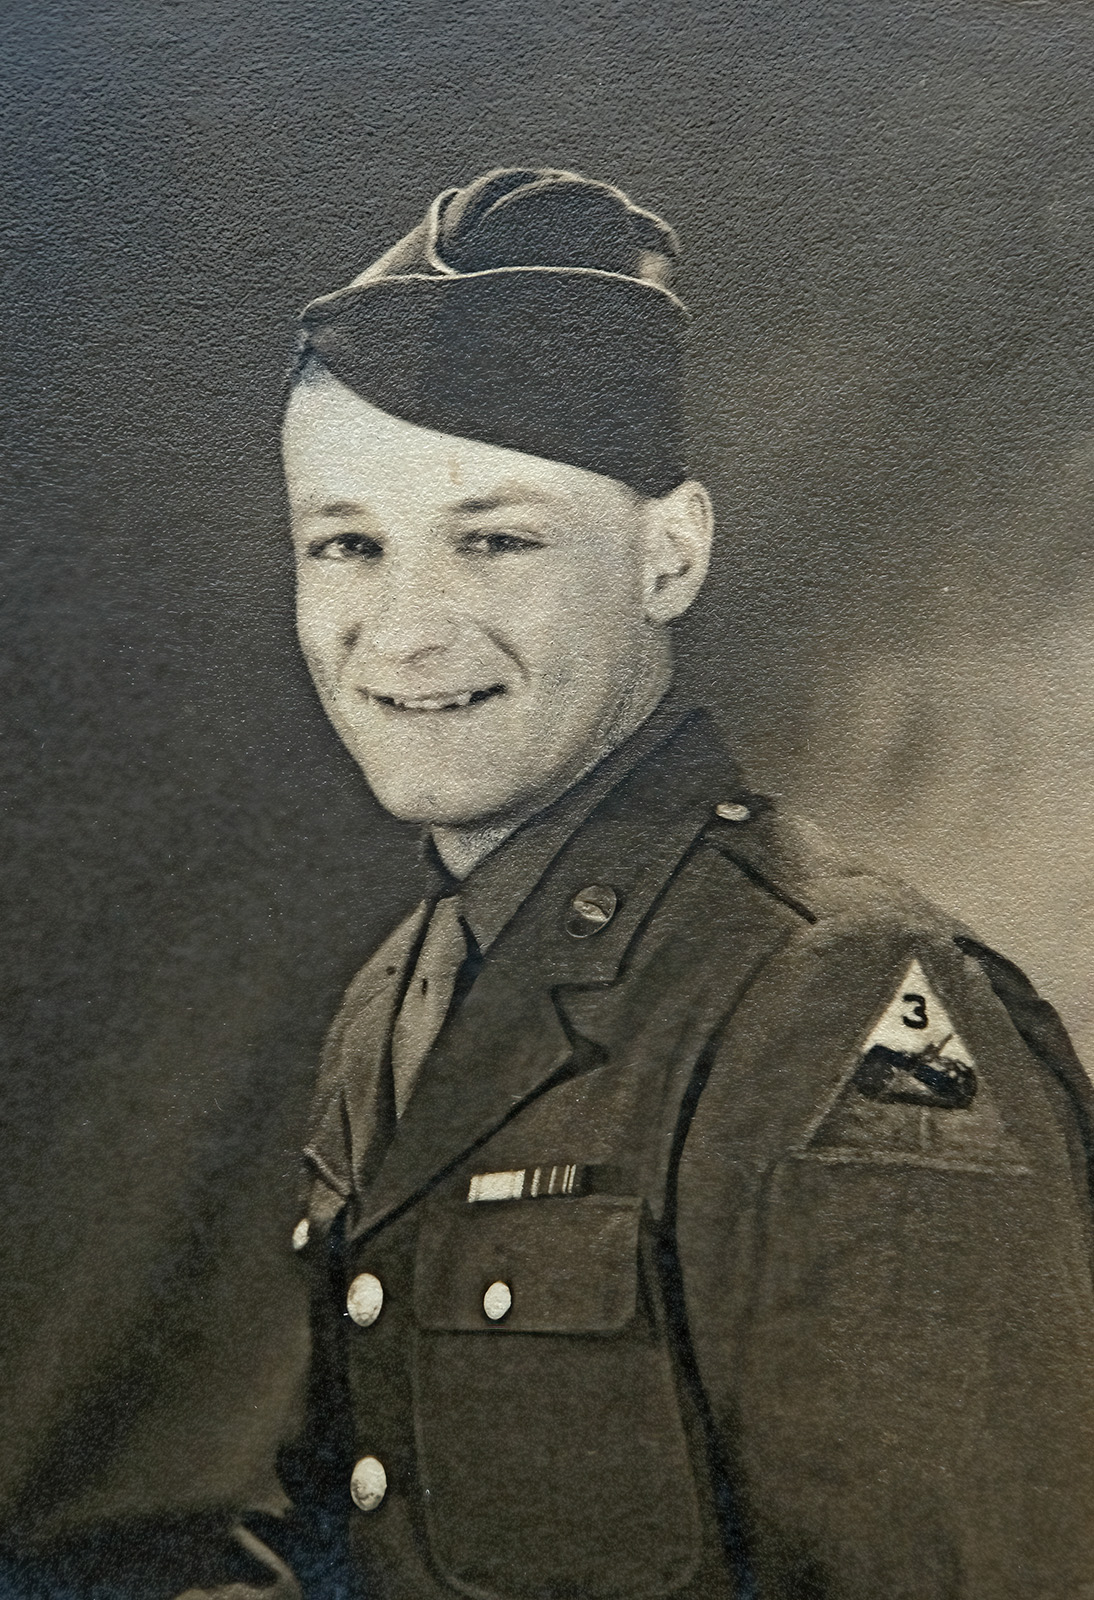 Sergeant Lewis A. Towns